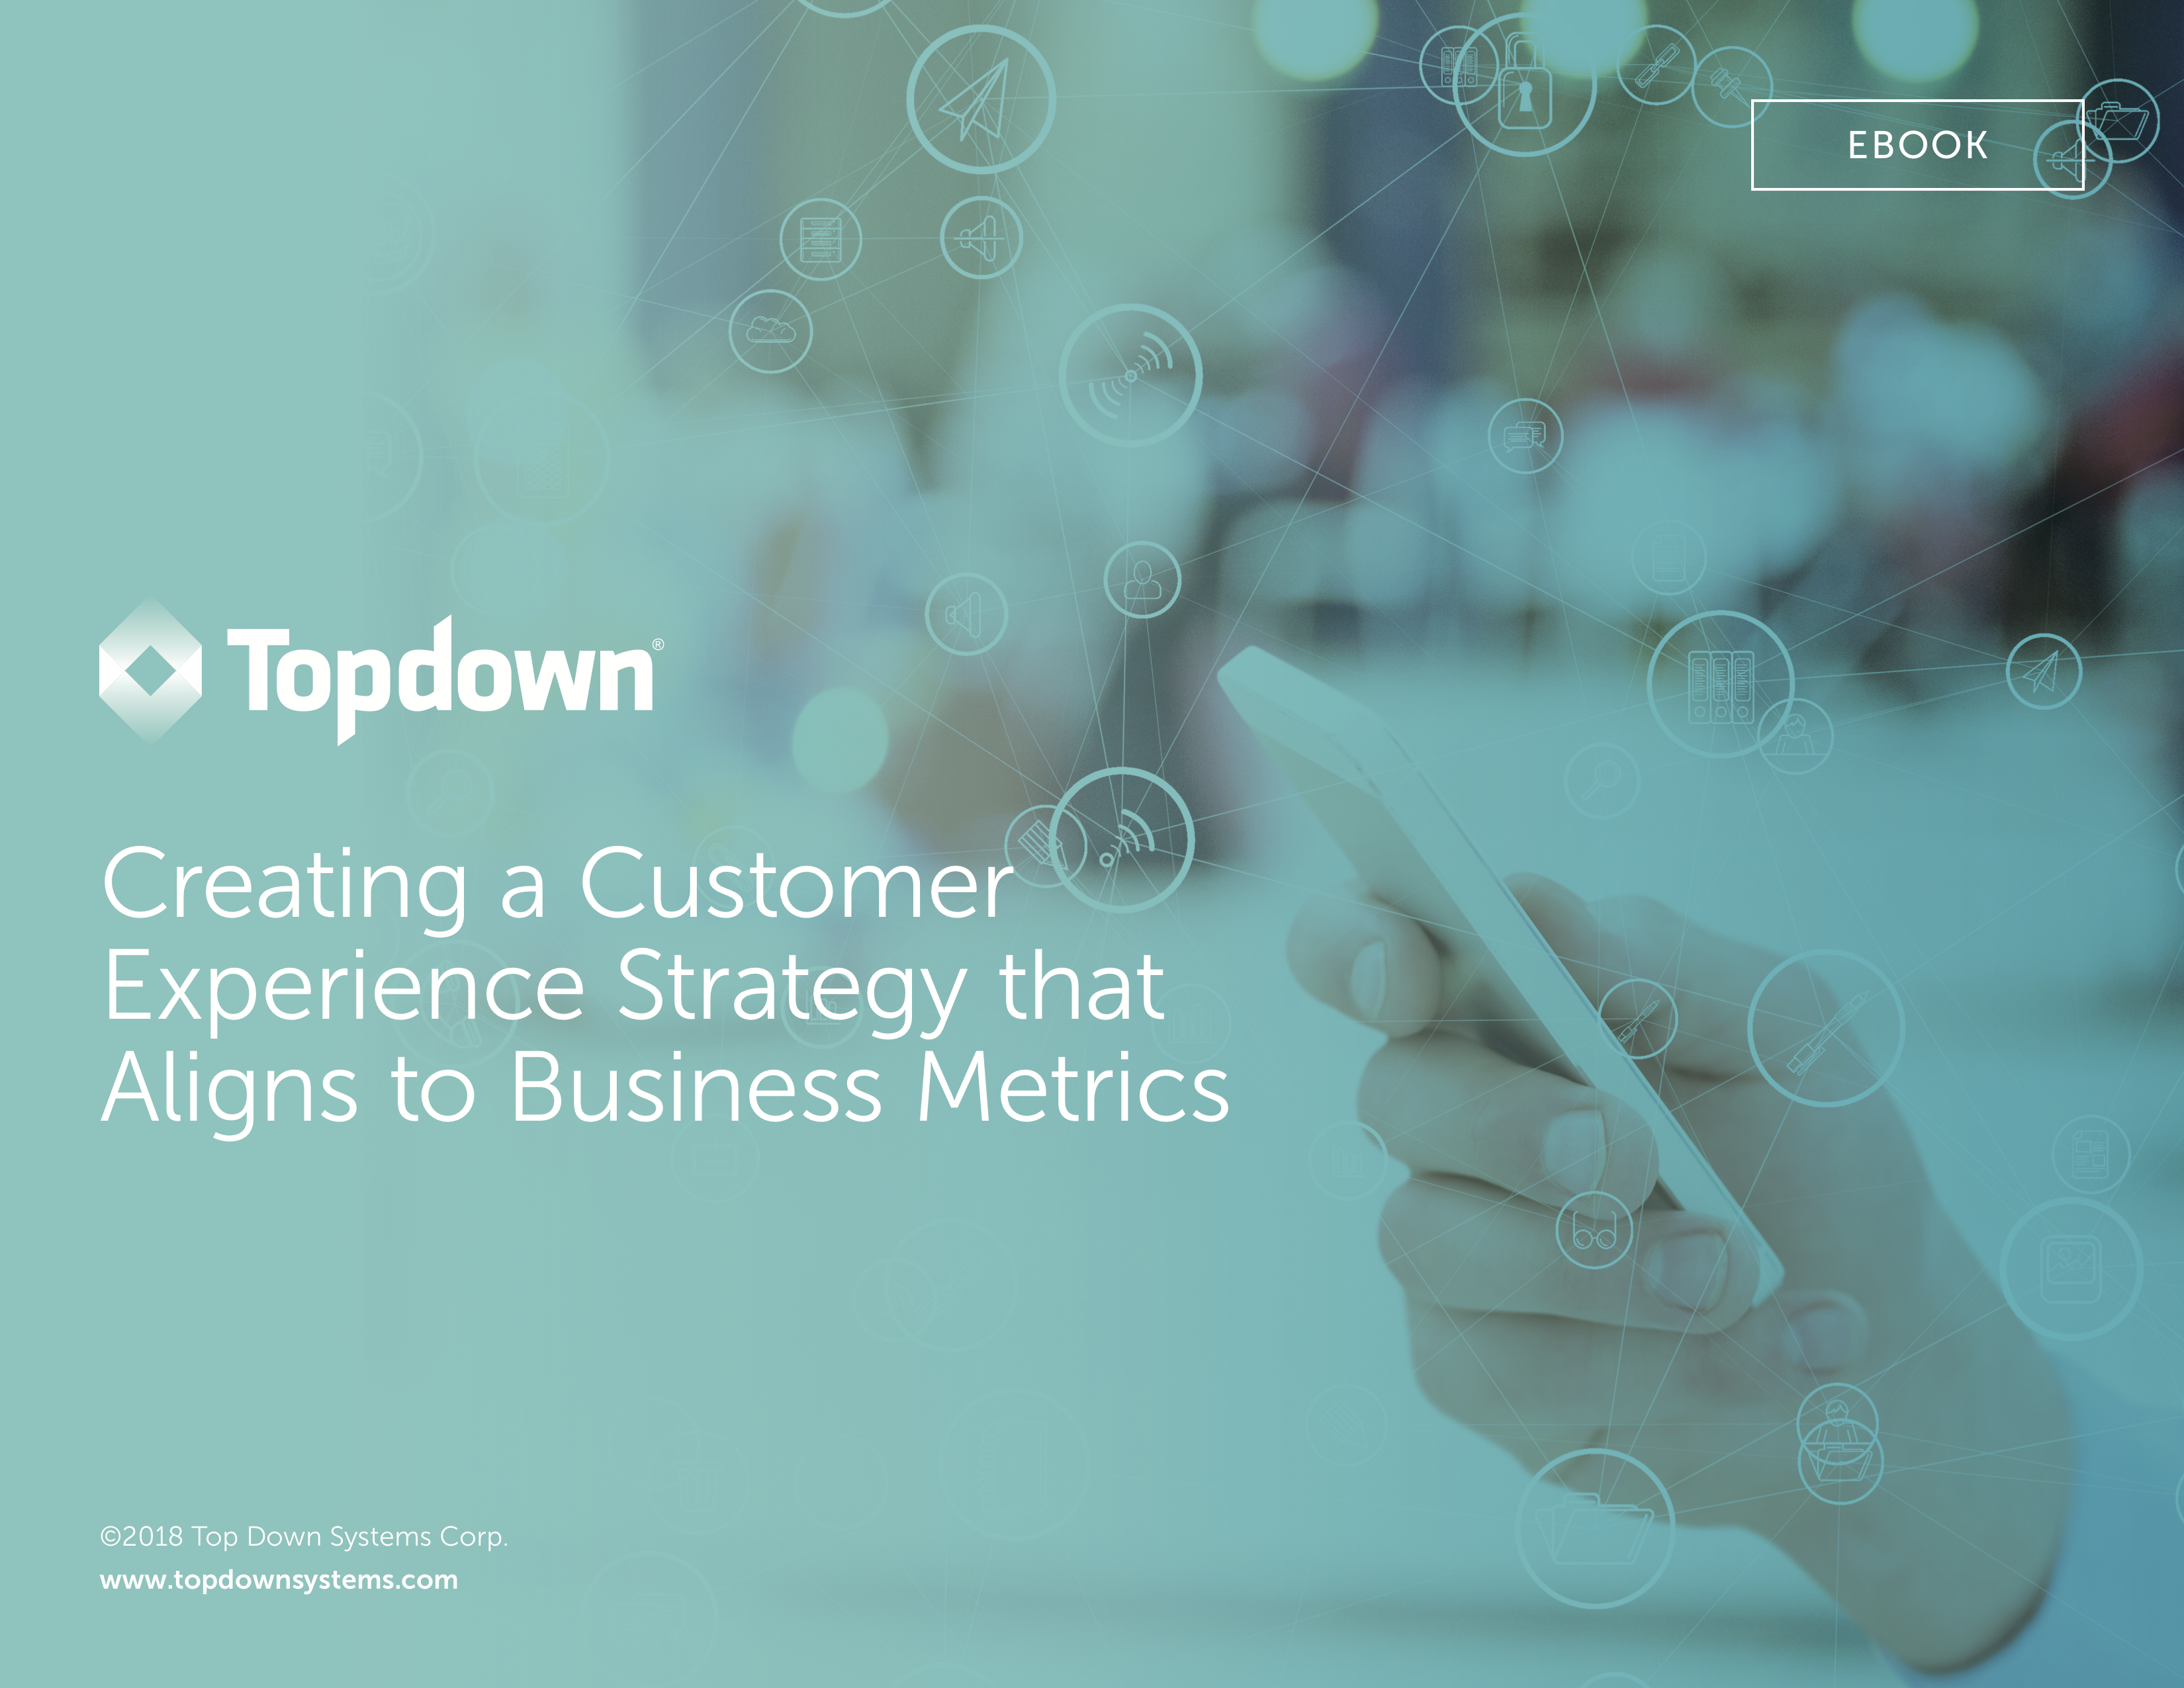 Align Customer Experience Strategy to Business Metrics